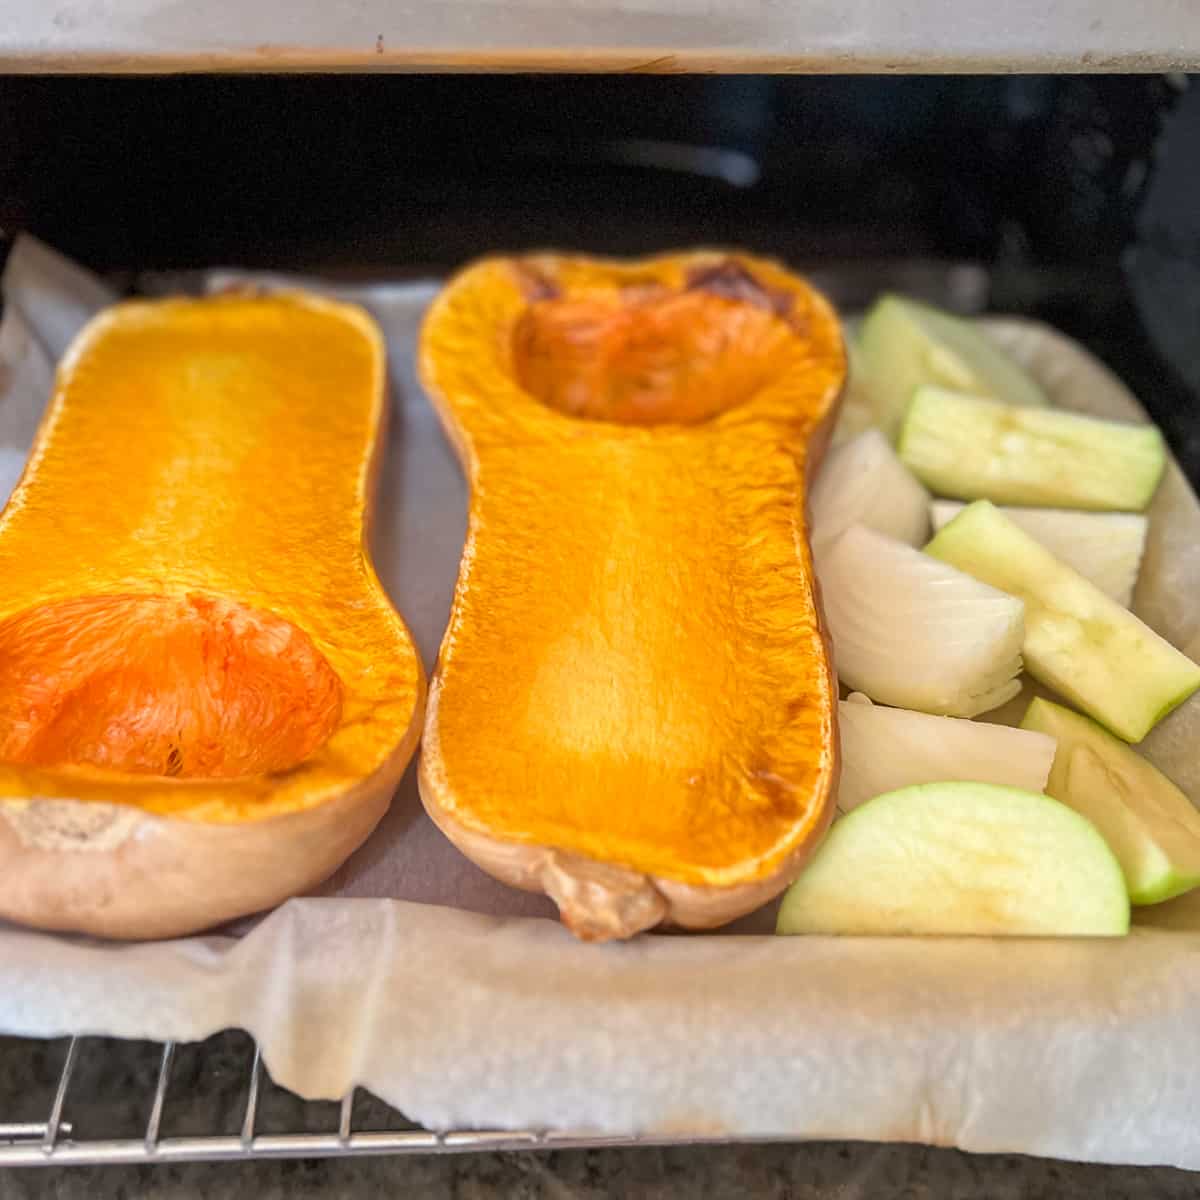 top side view of a baking sheet in the oven with butternut squash that's partially cooked on the left and uncooked raw onion and apple on the right